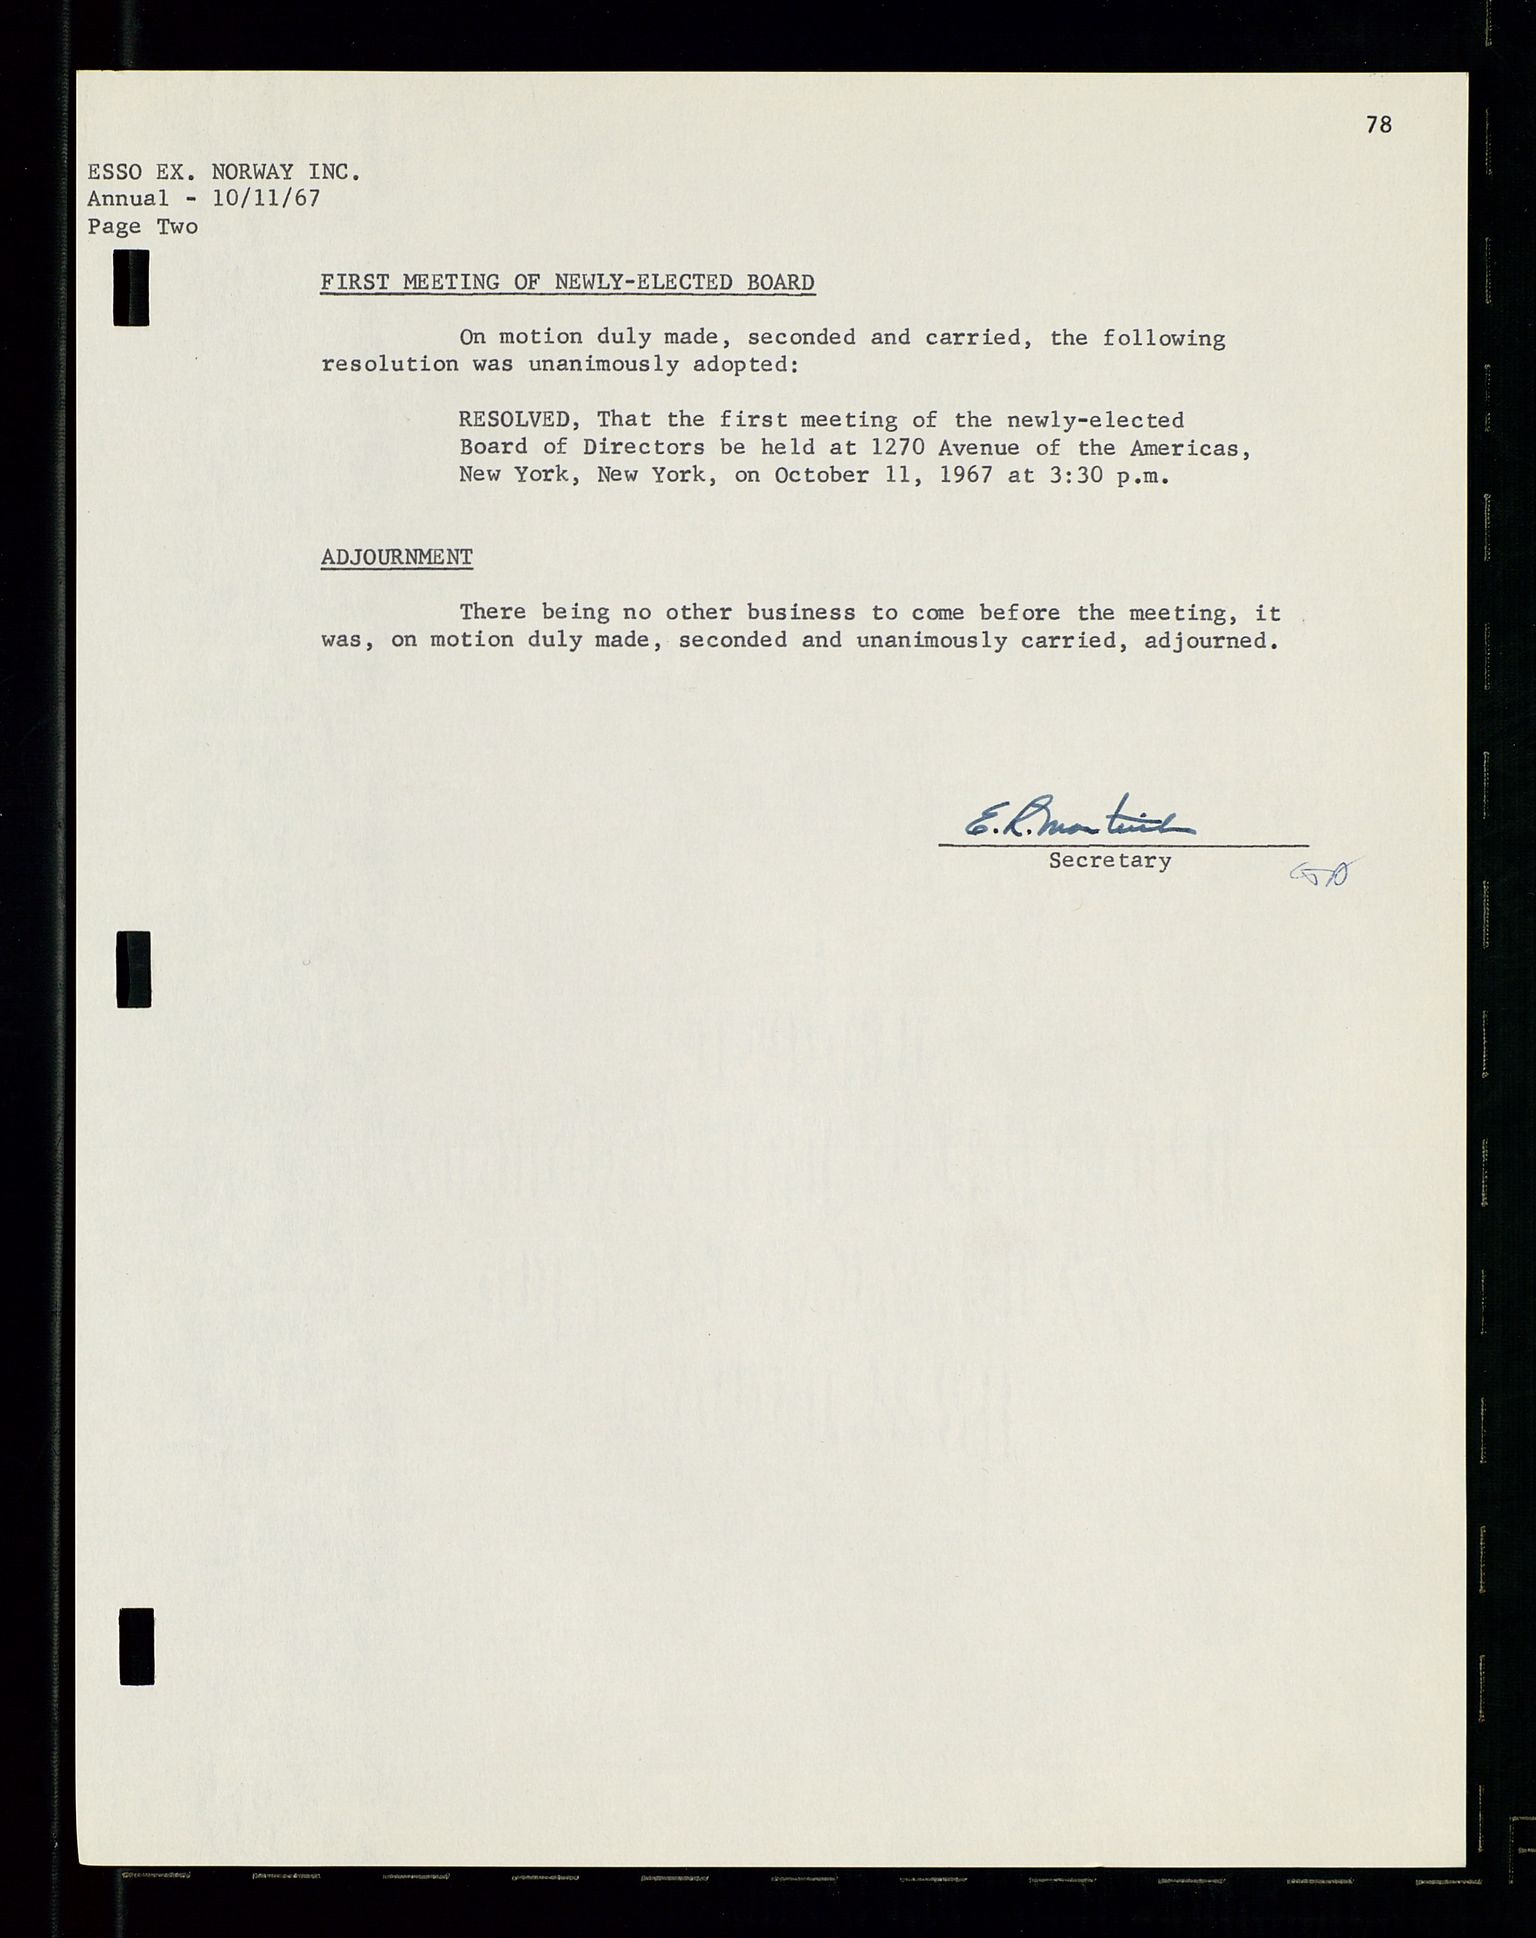 Pa 1512 - Esso Exploration and Production Norway Inc., SAST/A-101917/A/Aa/L0001/0001: Styredokumenter / Corporate records, By-Laws, Board meeting minutes, Incorporations, 1965-1975, s. 78